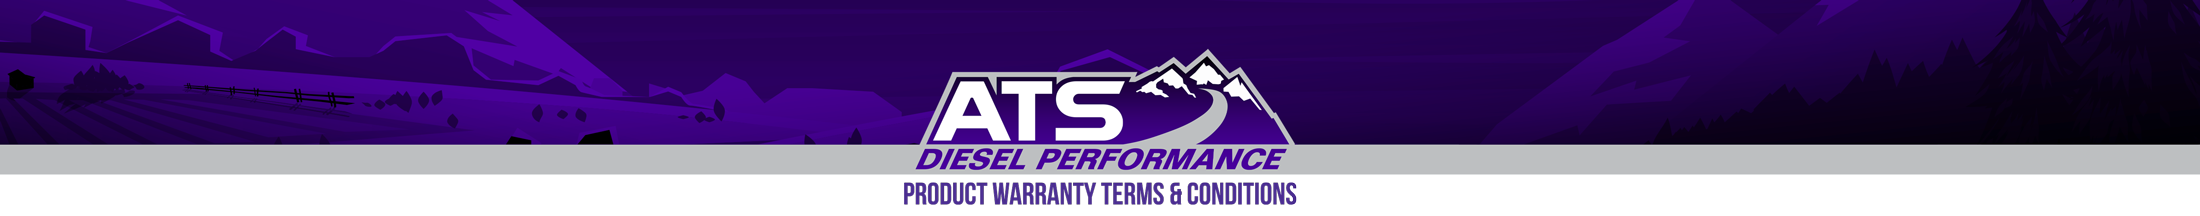 ATS Diesel Warranty Terms and Conditions